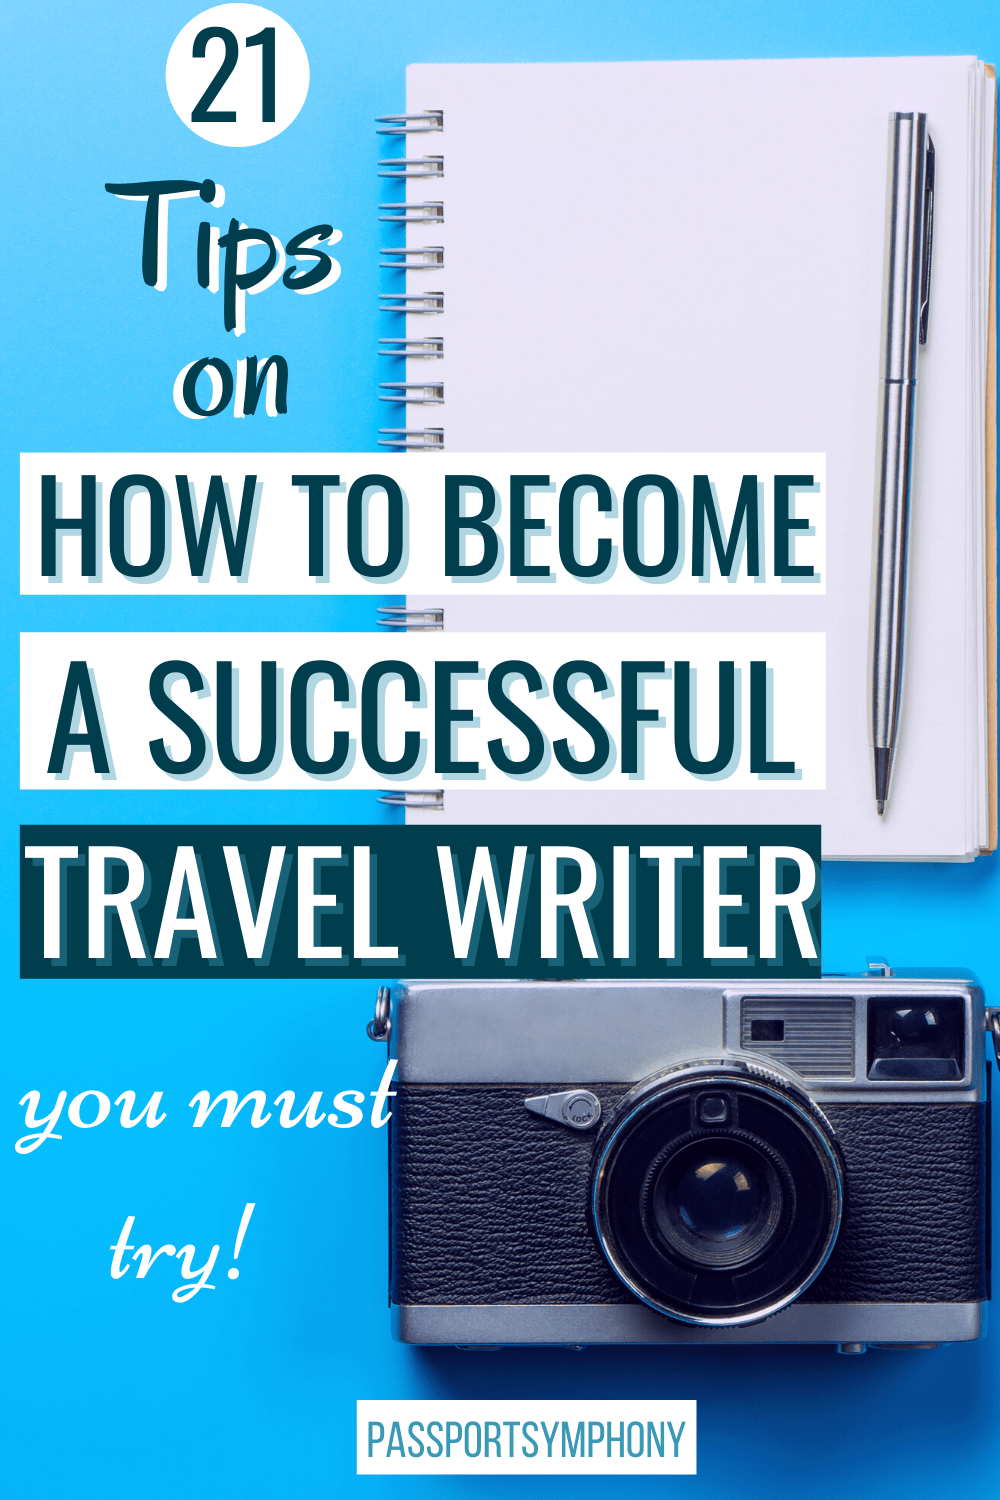 travel writing tips for beginners